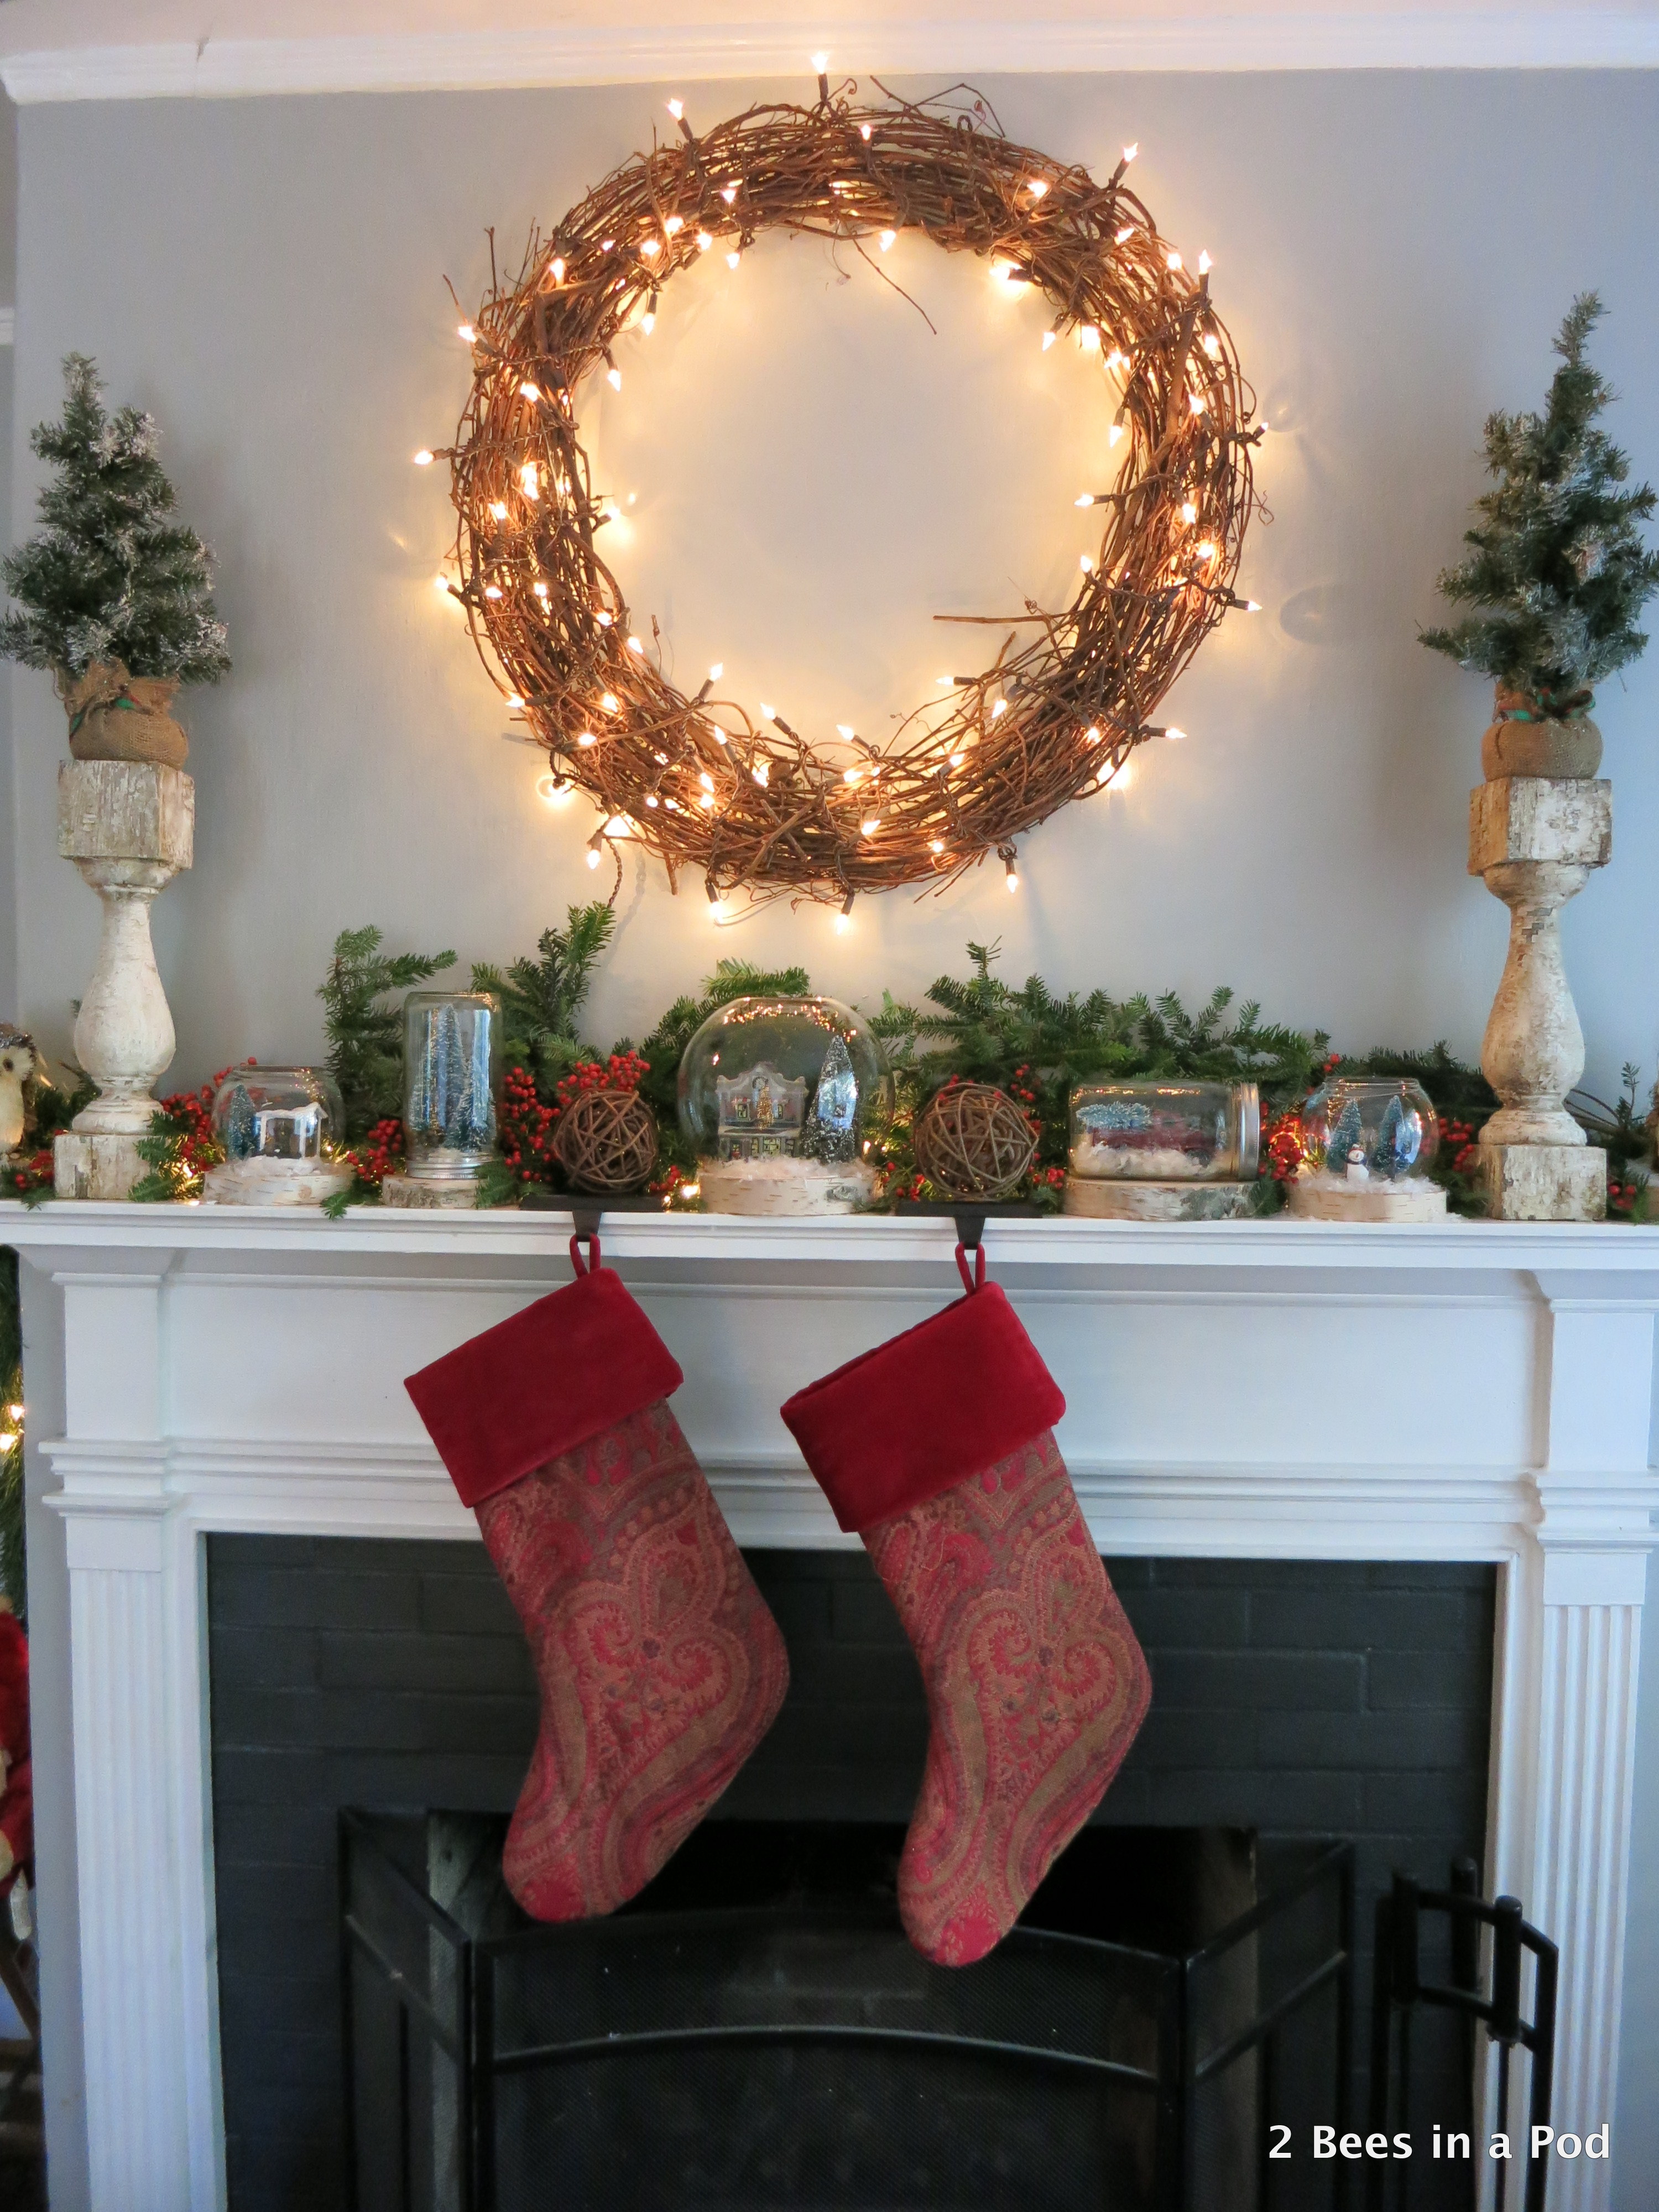 Rustic Christmas Mantel with Woodland Owls, Wood Slates, Winter Vignettes and grape wreath